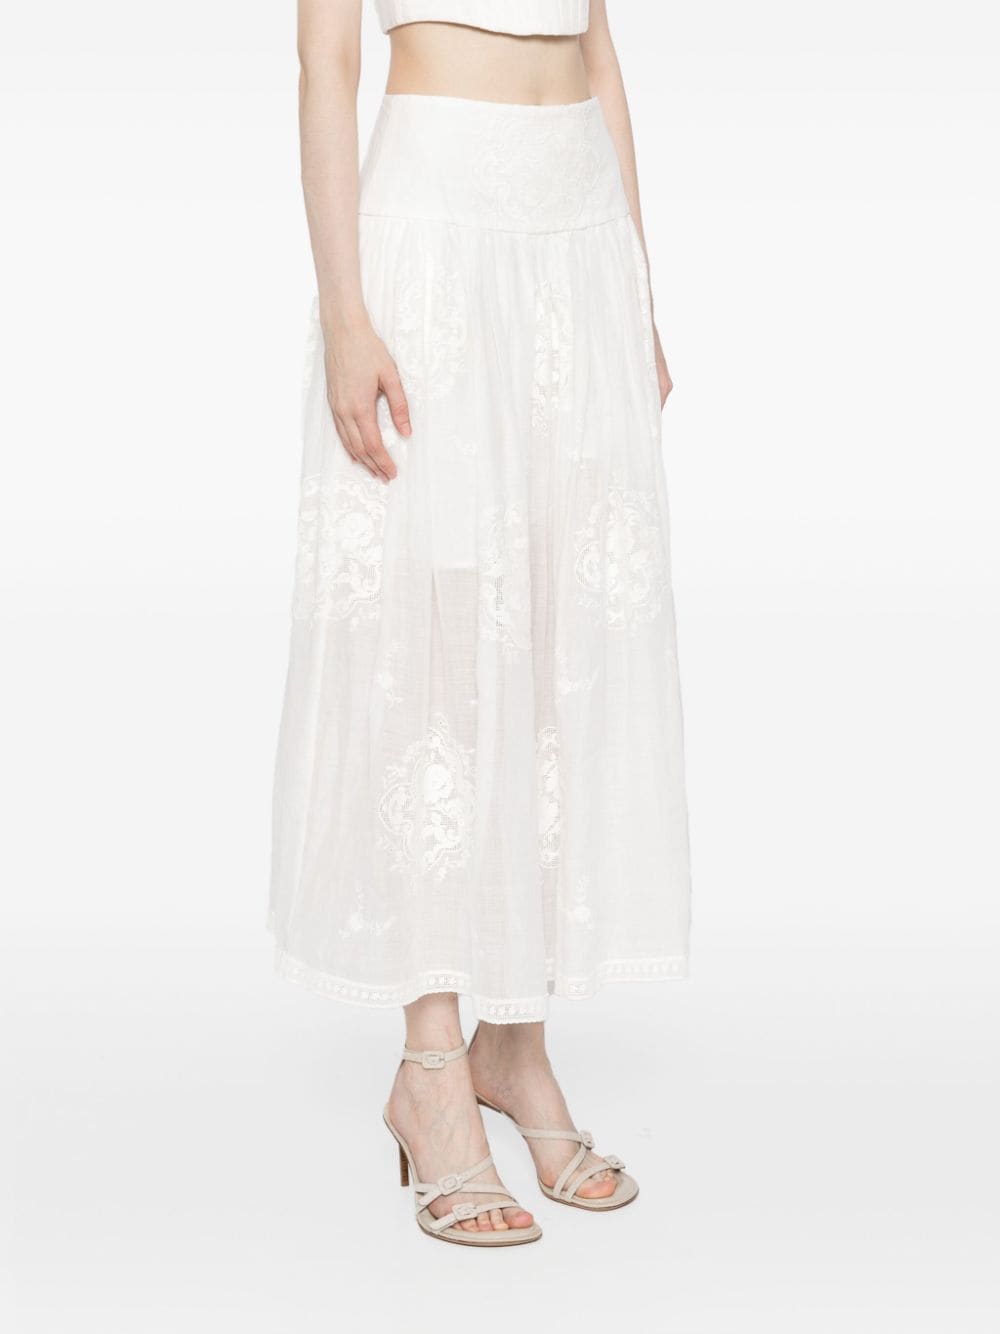 ZIMMERMANN Floral Embroidered Midi Skirt in Ivory for Women